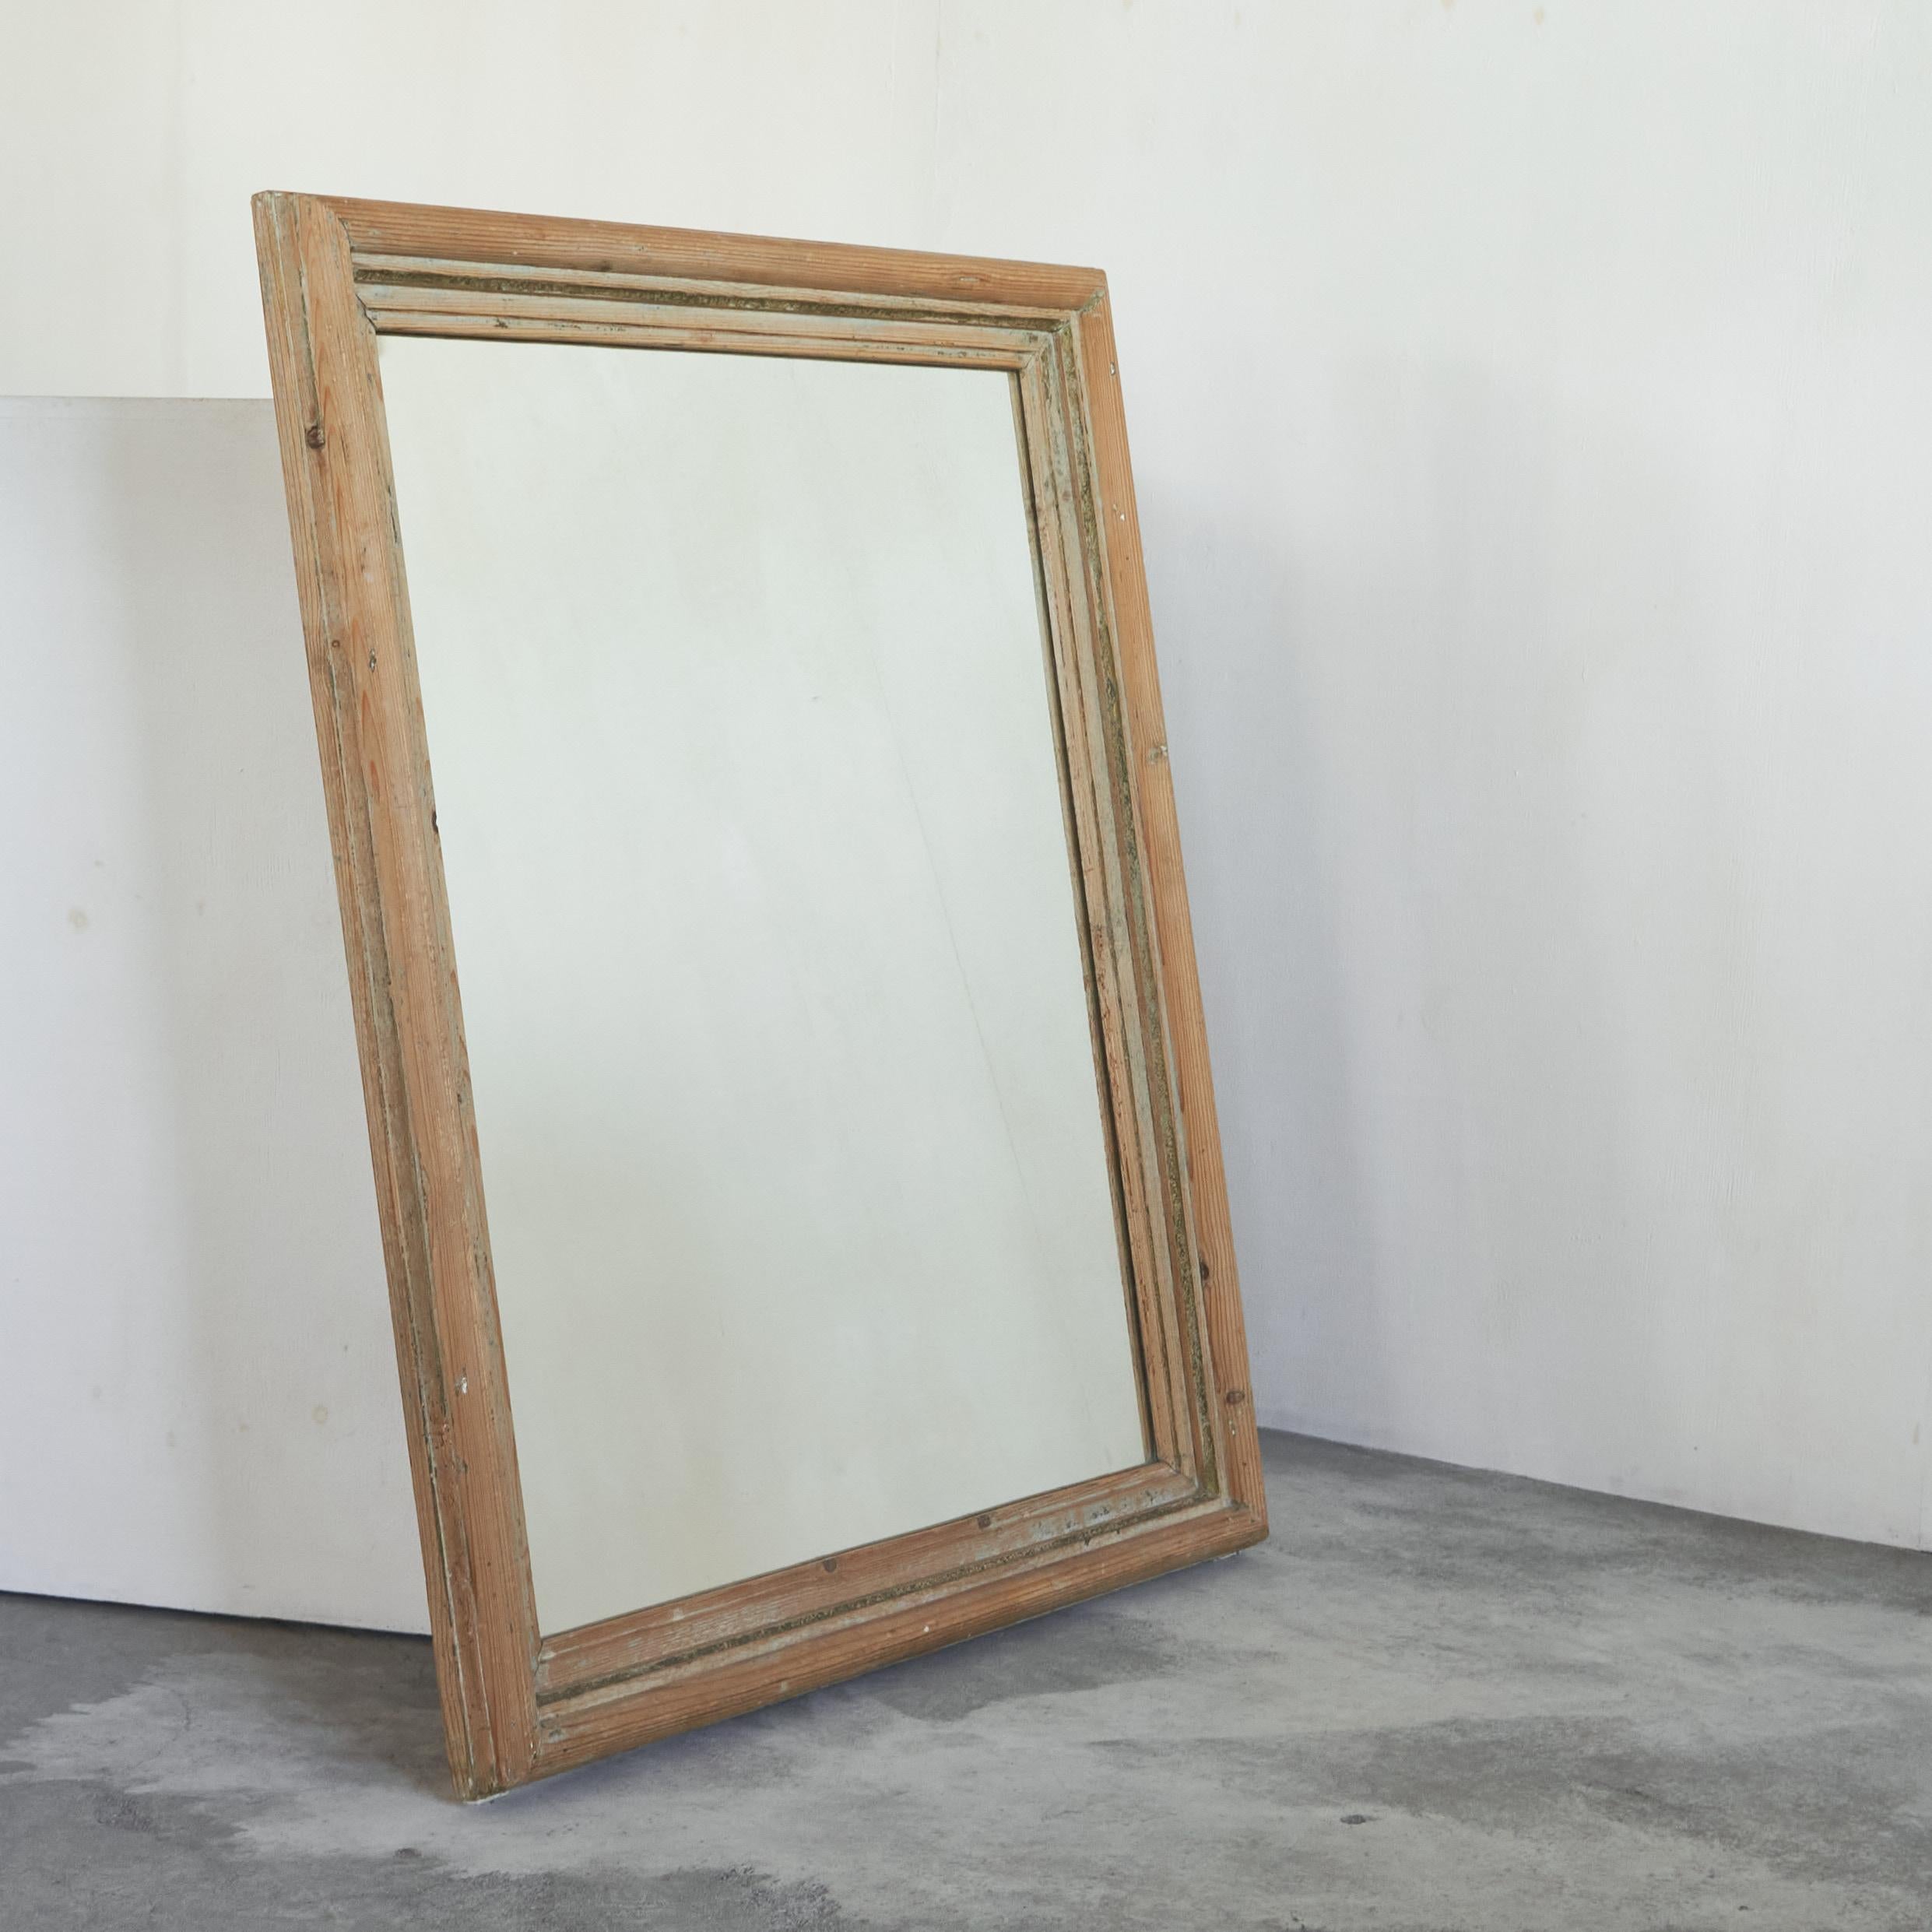 Large Rustic Mirror in Pine and Faded Paint

Beautiful and large wall mirror in pine with hints of faded old paint. The mirror has a wonderful rustic and timeless style and would be perfect for any elegant interior. The shape is very modest, but the